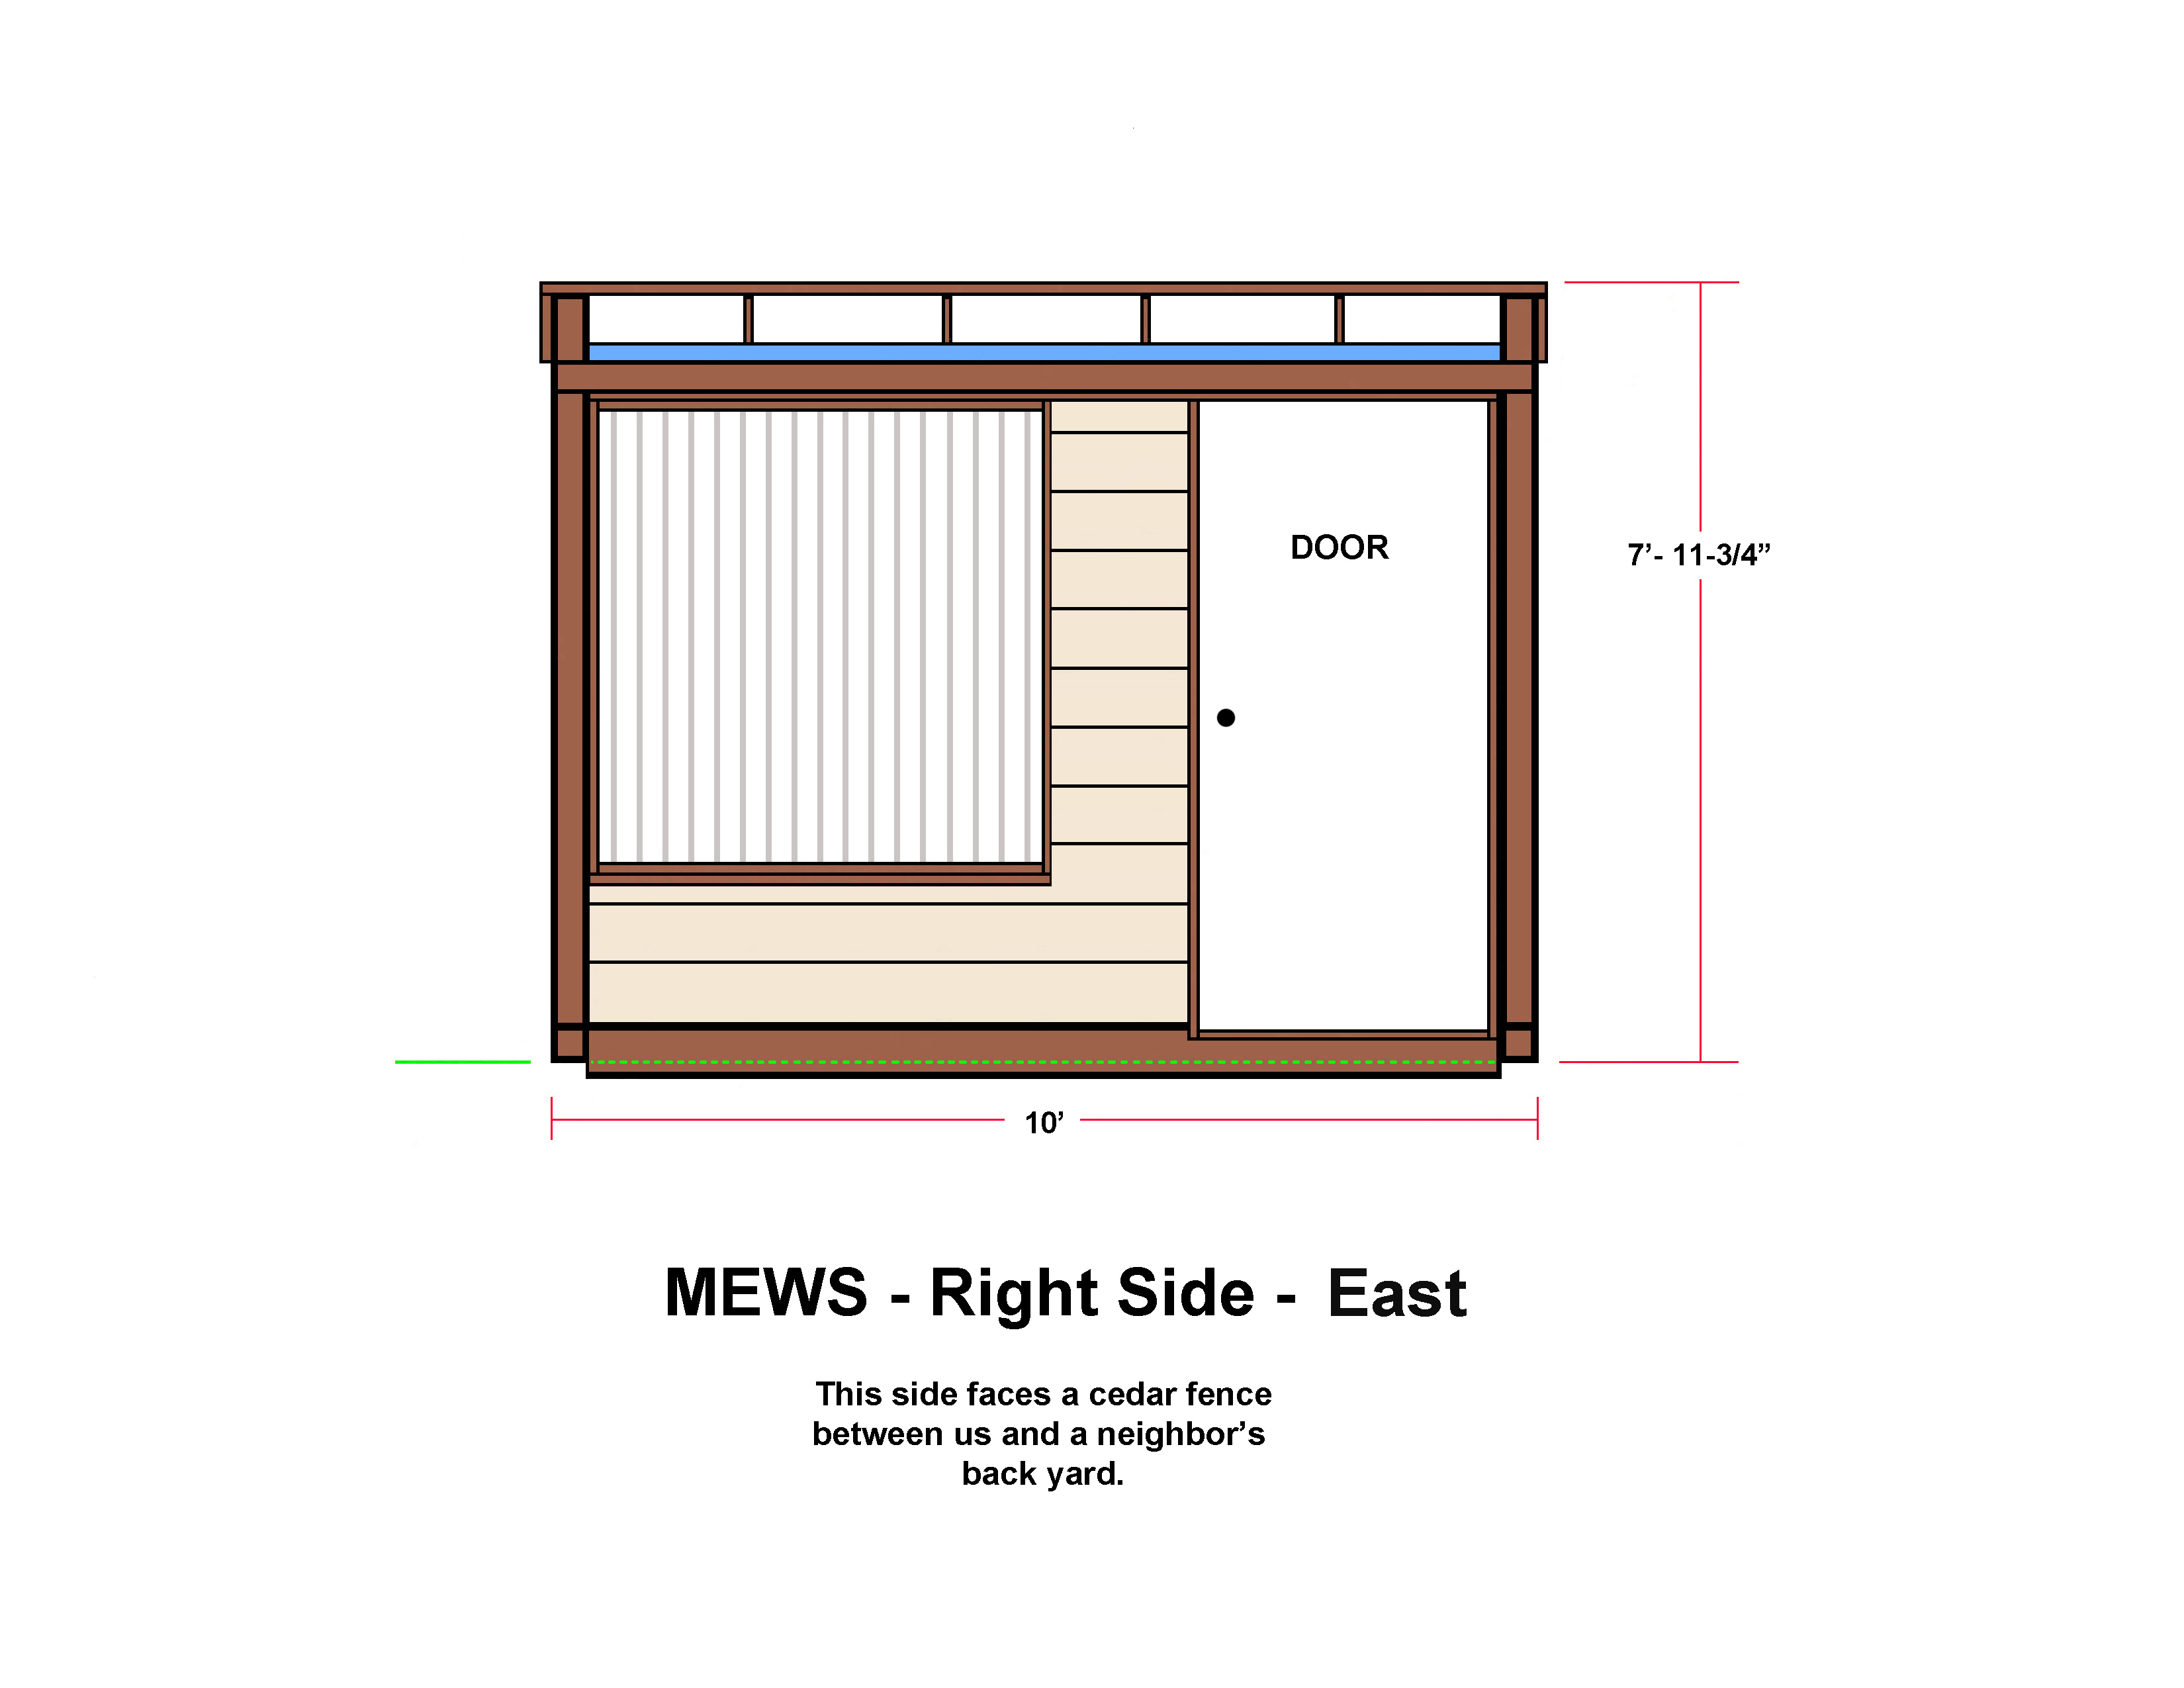 MEWS - Right Side - East - Long Window Version